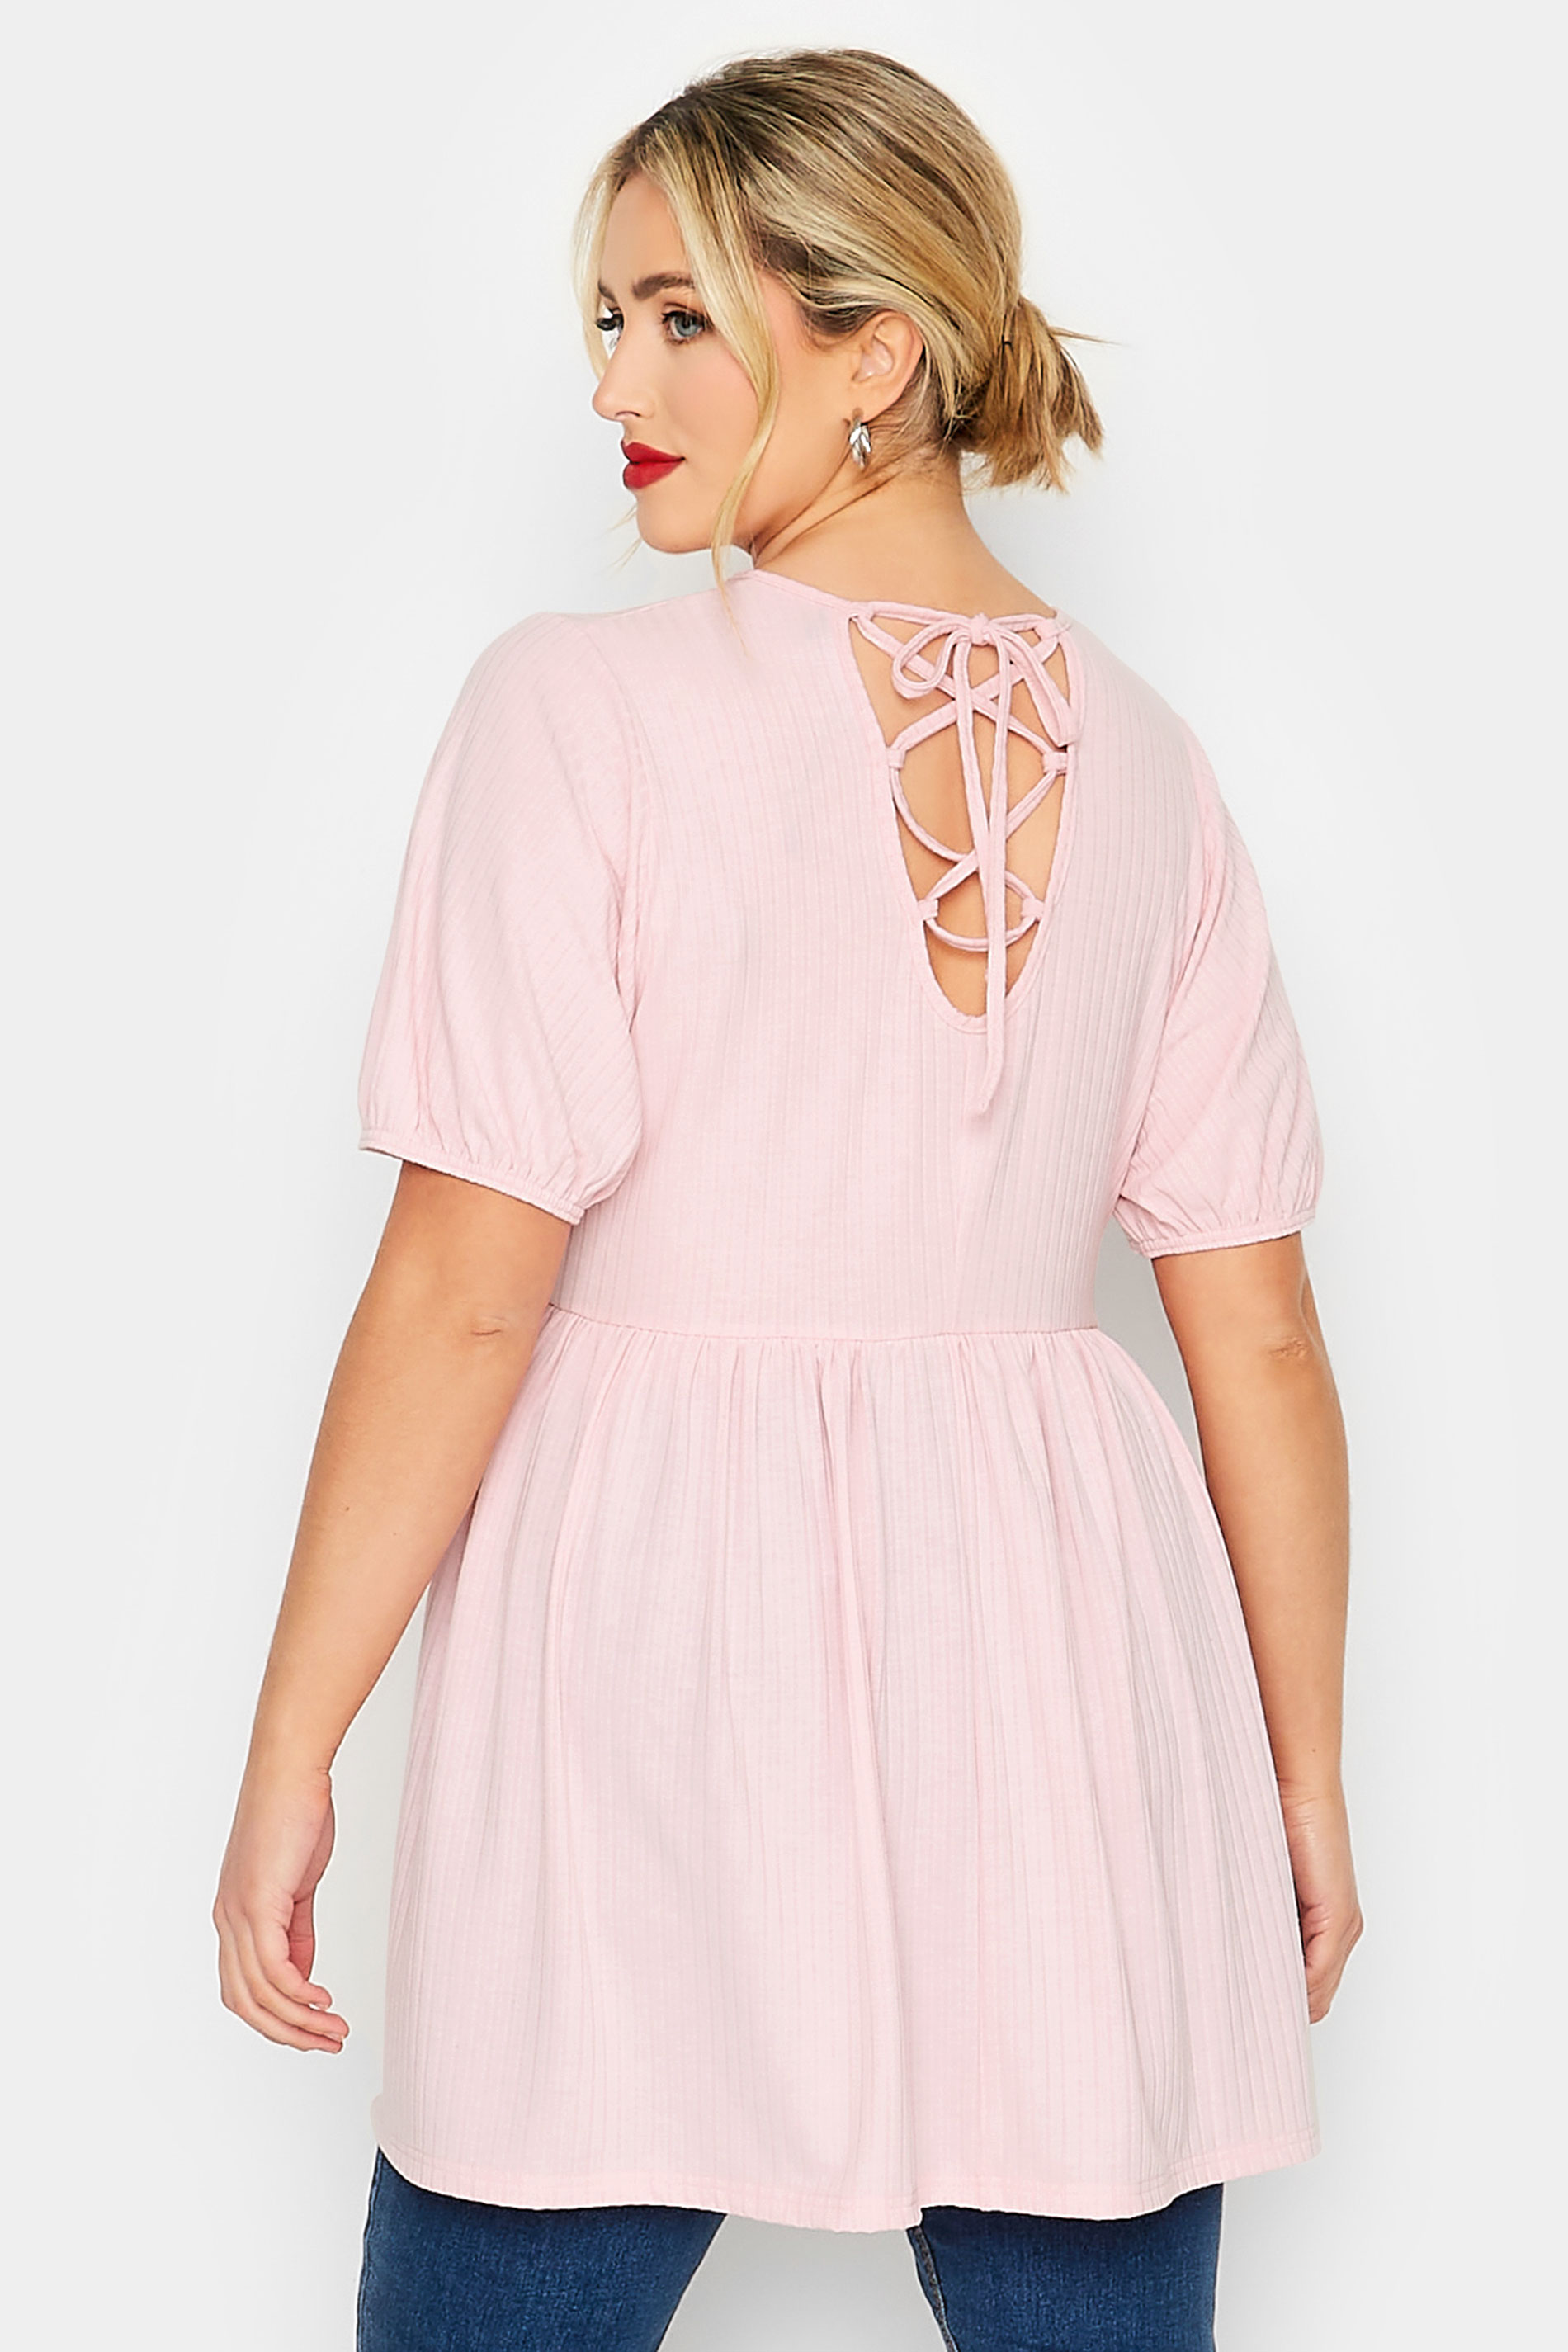 LIMITED COLLECTION Plus Size Blush Pink Tie Back Peplum Top | Yours Clothing 1